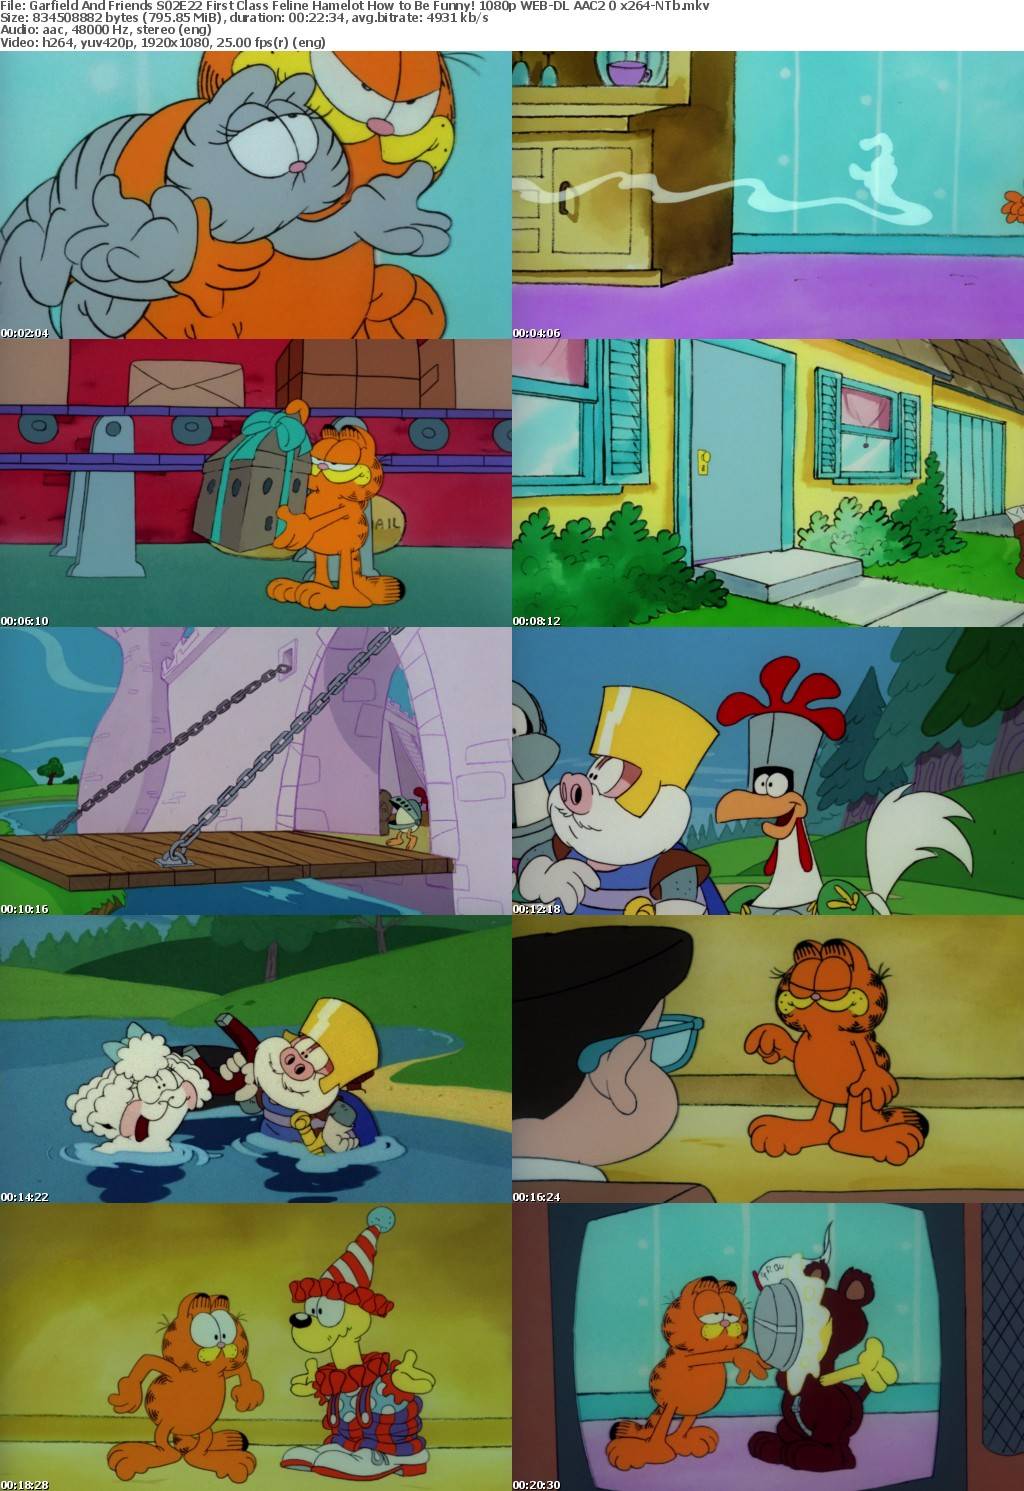 Garfield And Friends S02E22 First Class Feline Hamelot How to Be Funny! 1080p WEB-DL AAC2 0 x264-NTb